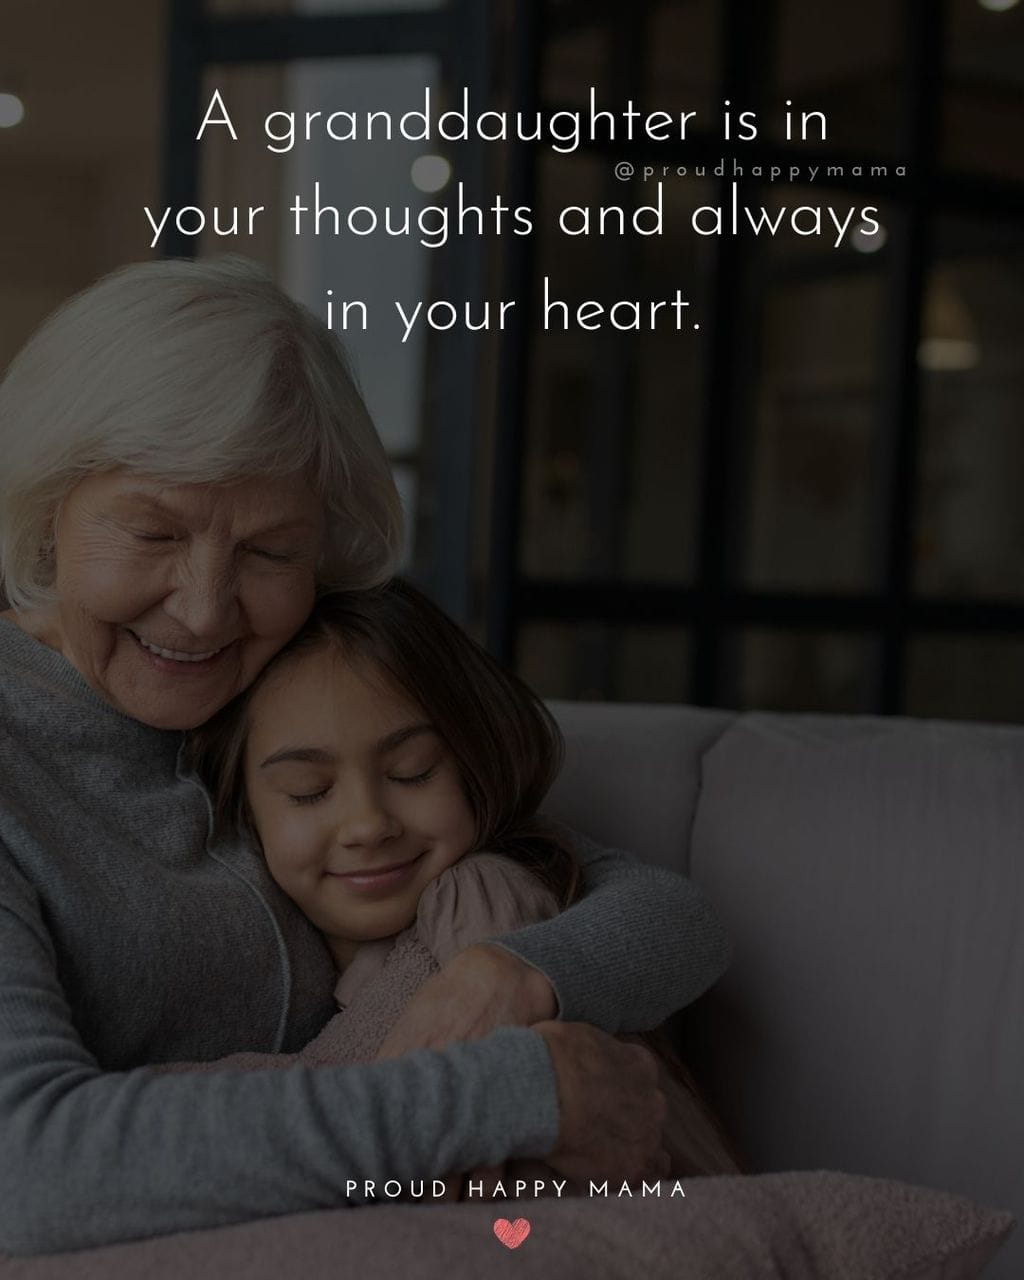 Granddaughter and grandmother hugging while sitting on couch. Text overlay, ‘A granddaughter is in your thoughts and always in your heart.’